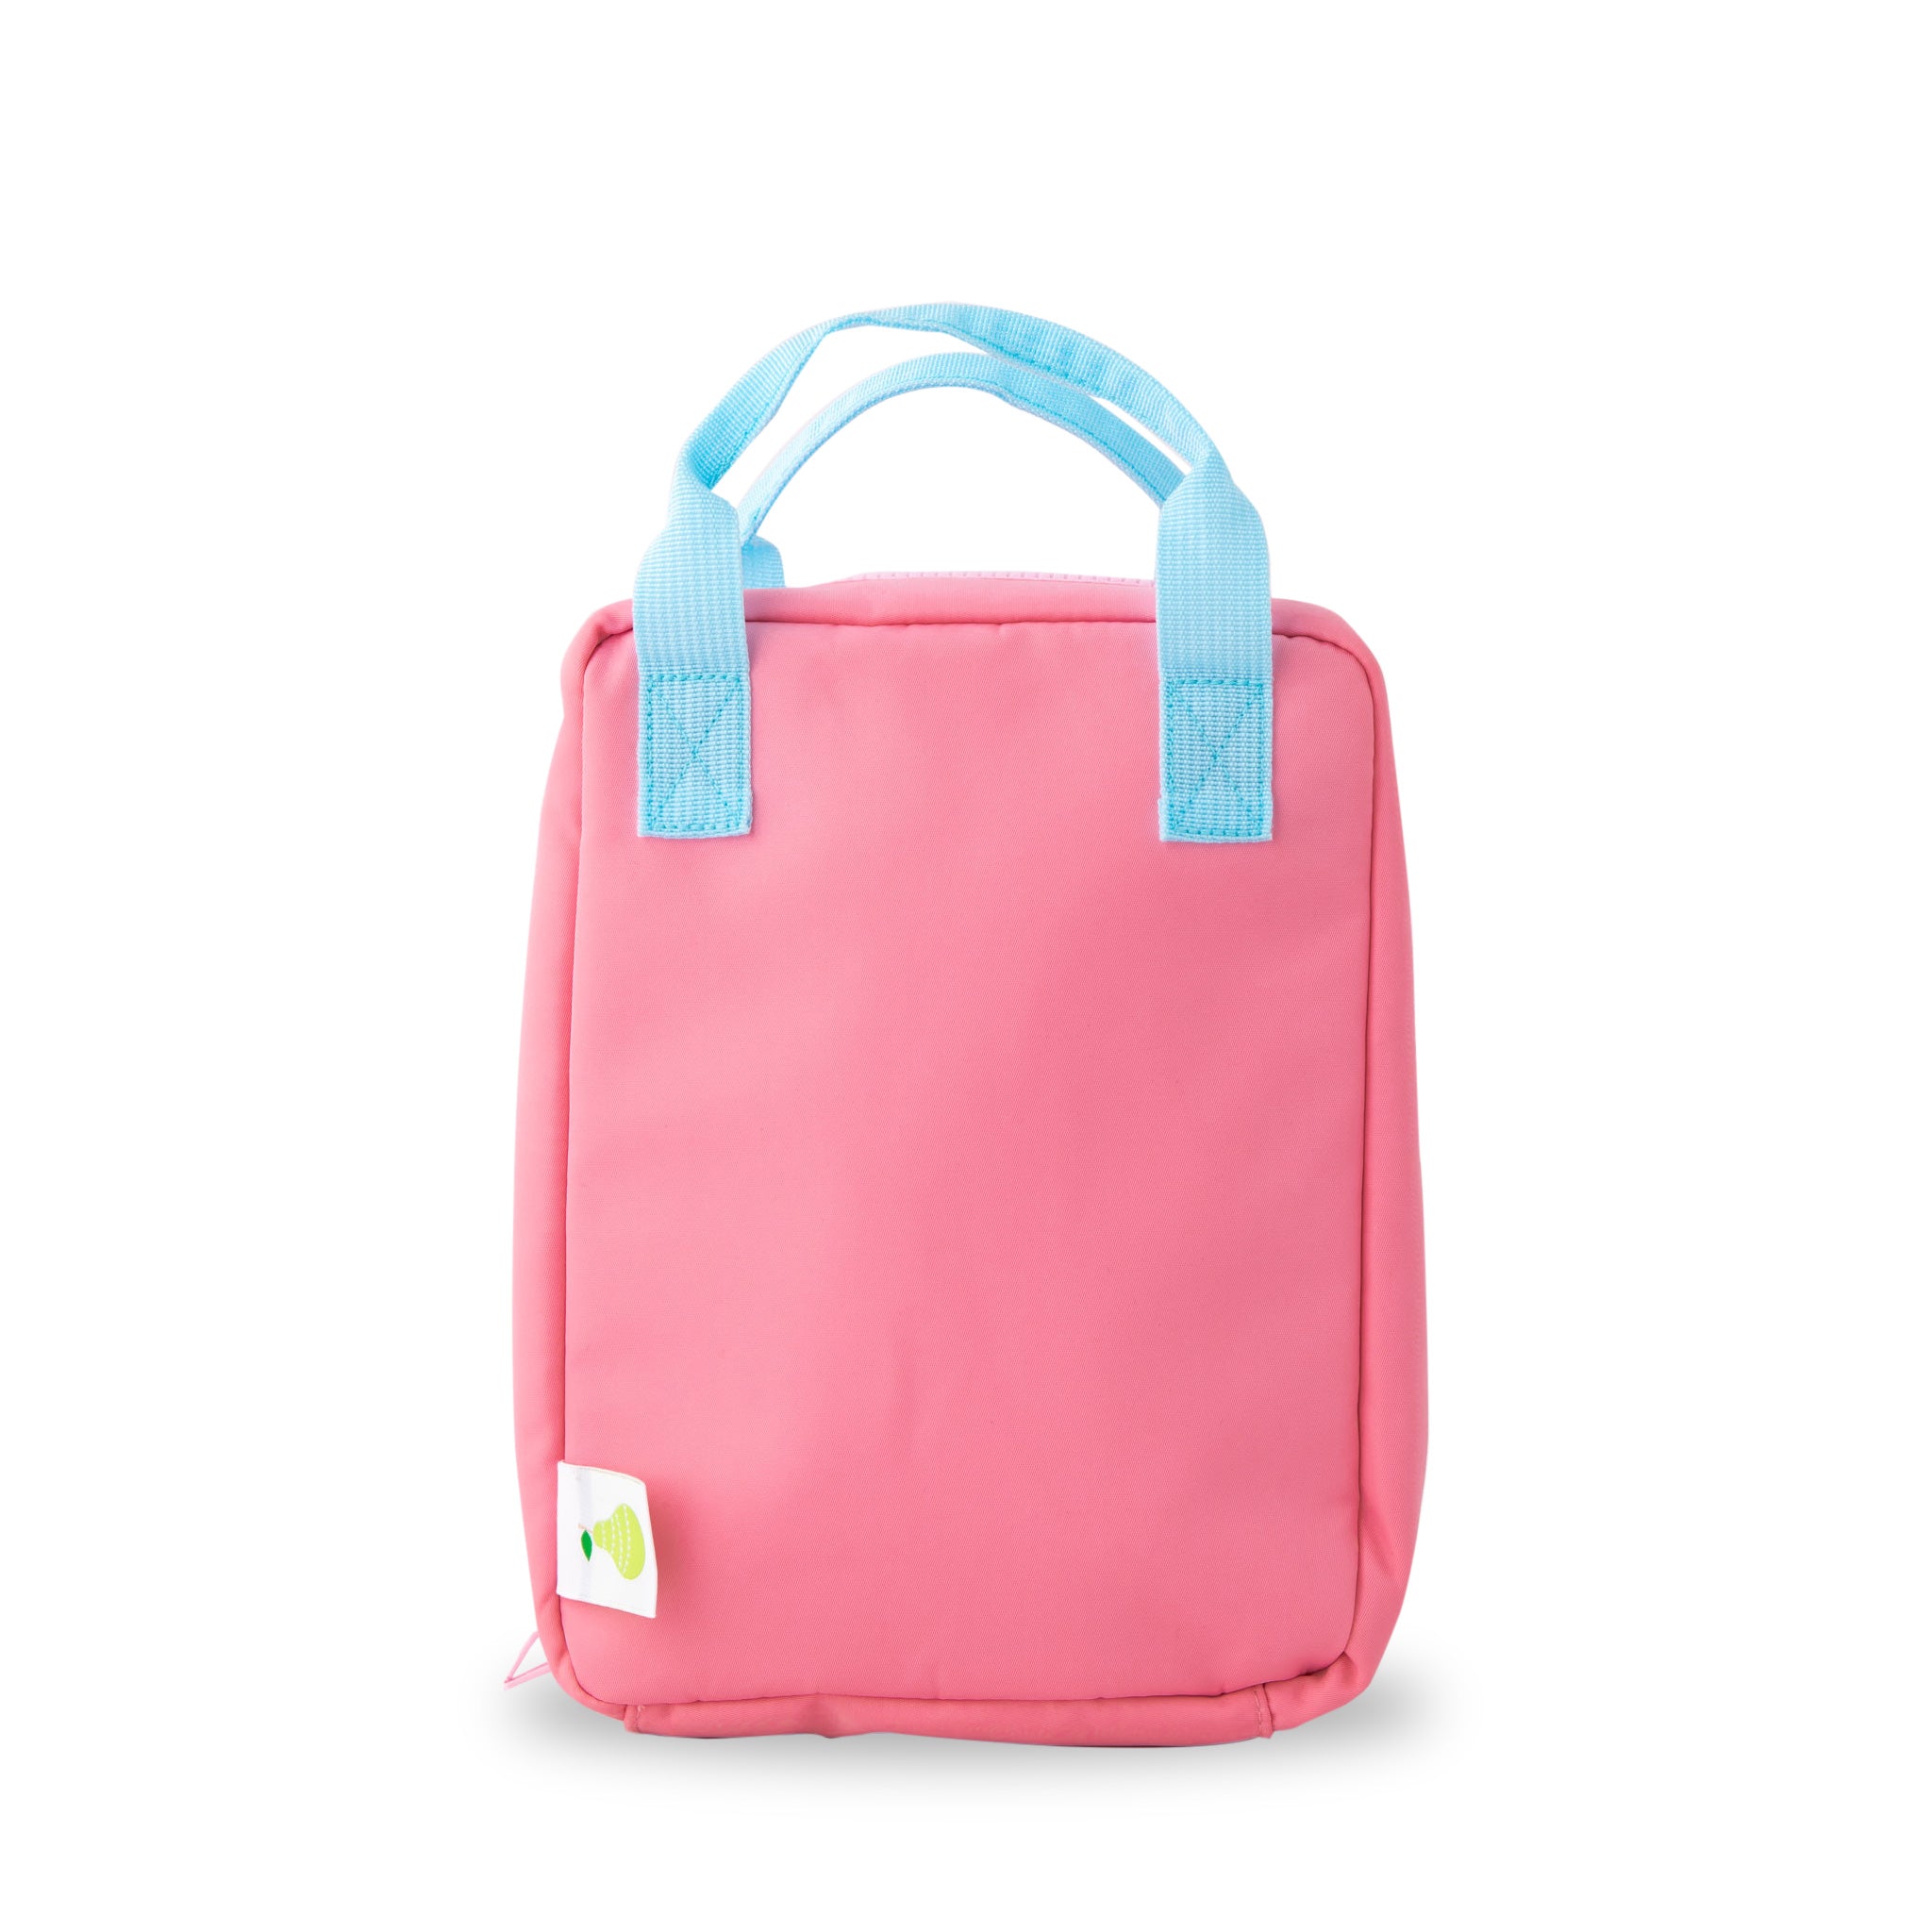 light pink insulated lunch bag with light blue handles - nudie rudie lunch box